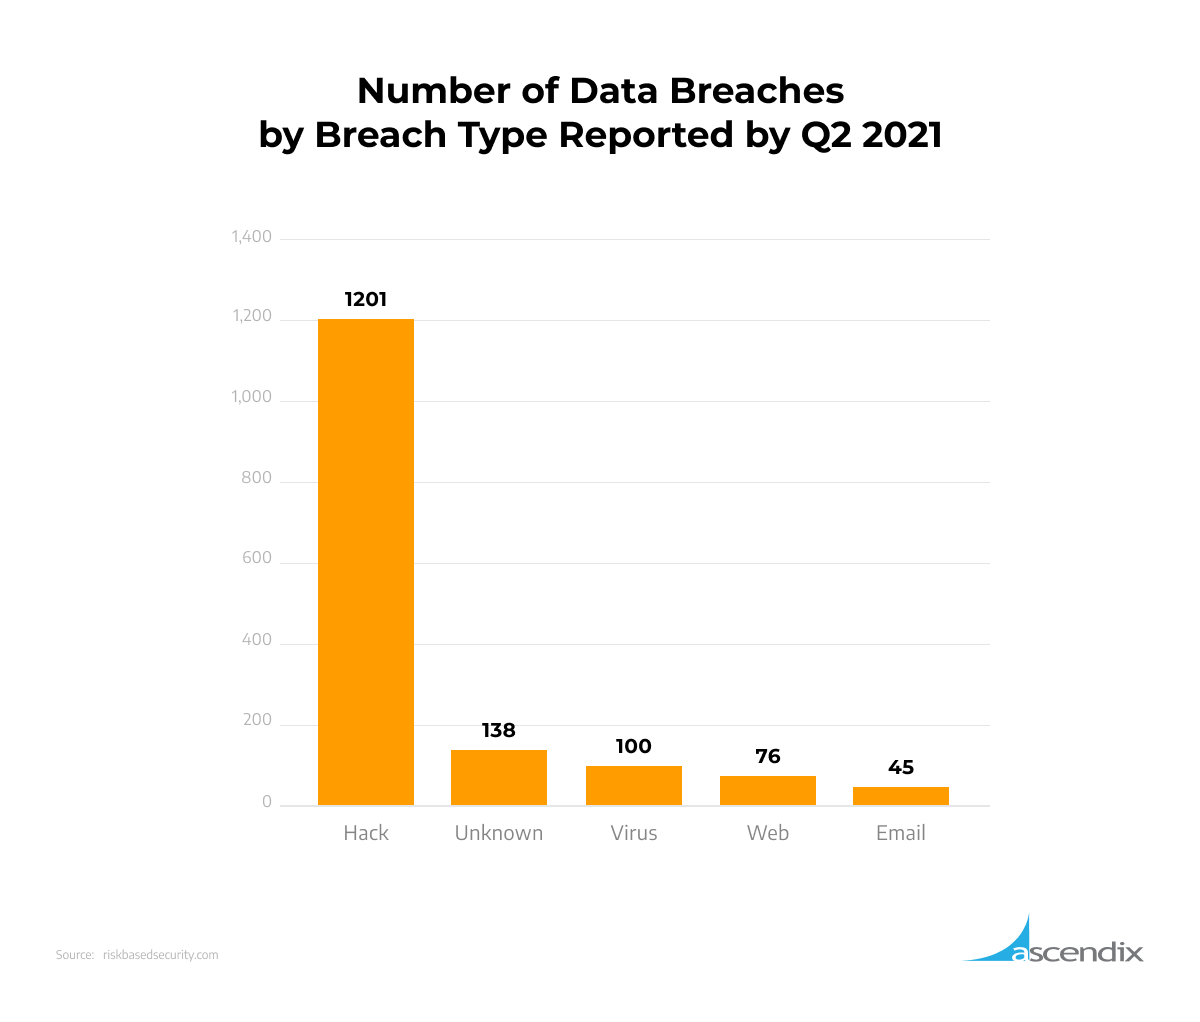 Number of Data Breaches by Breach Type Infographics Ascendix